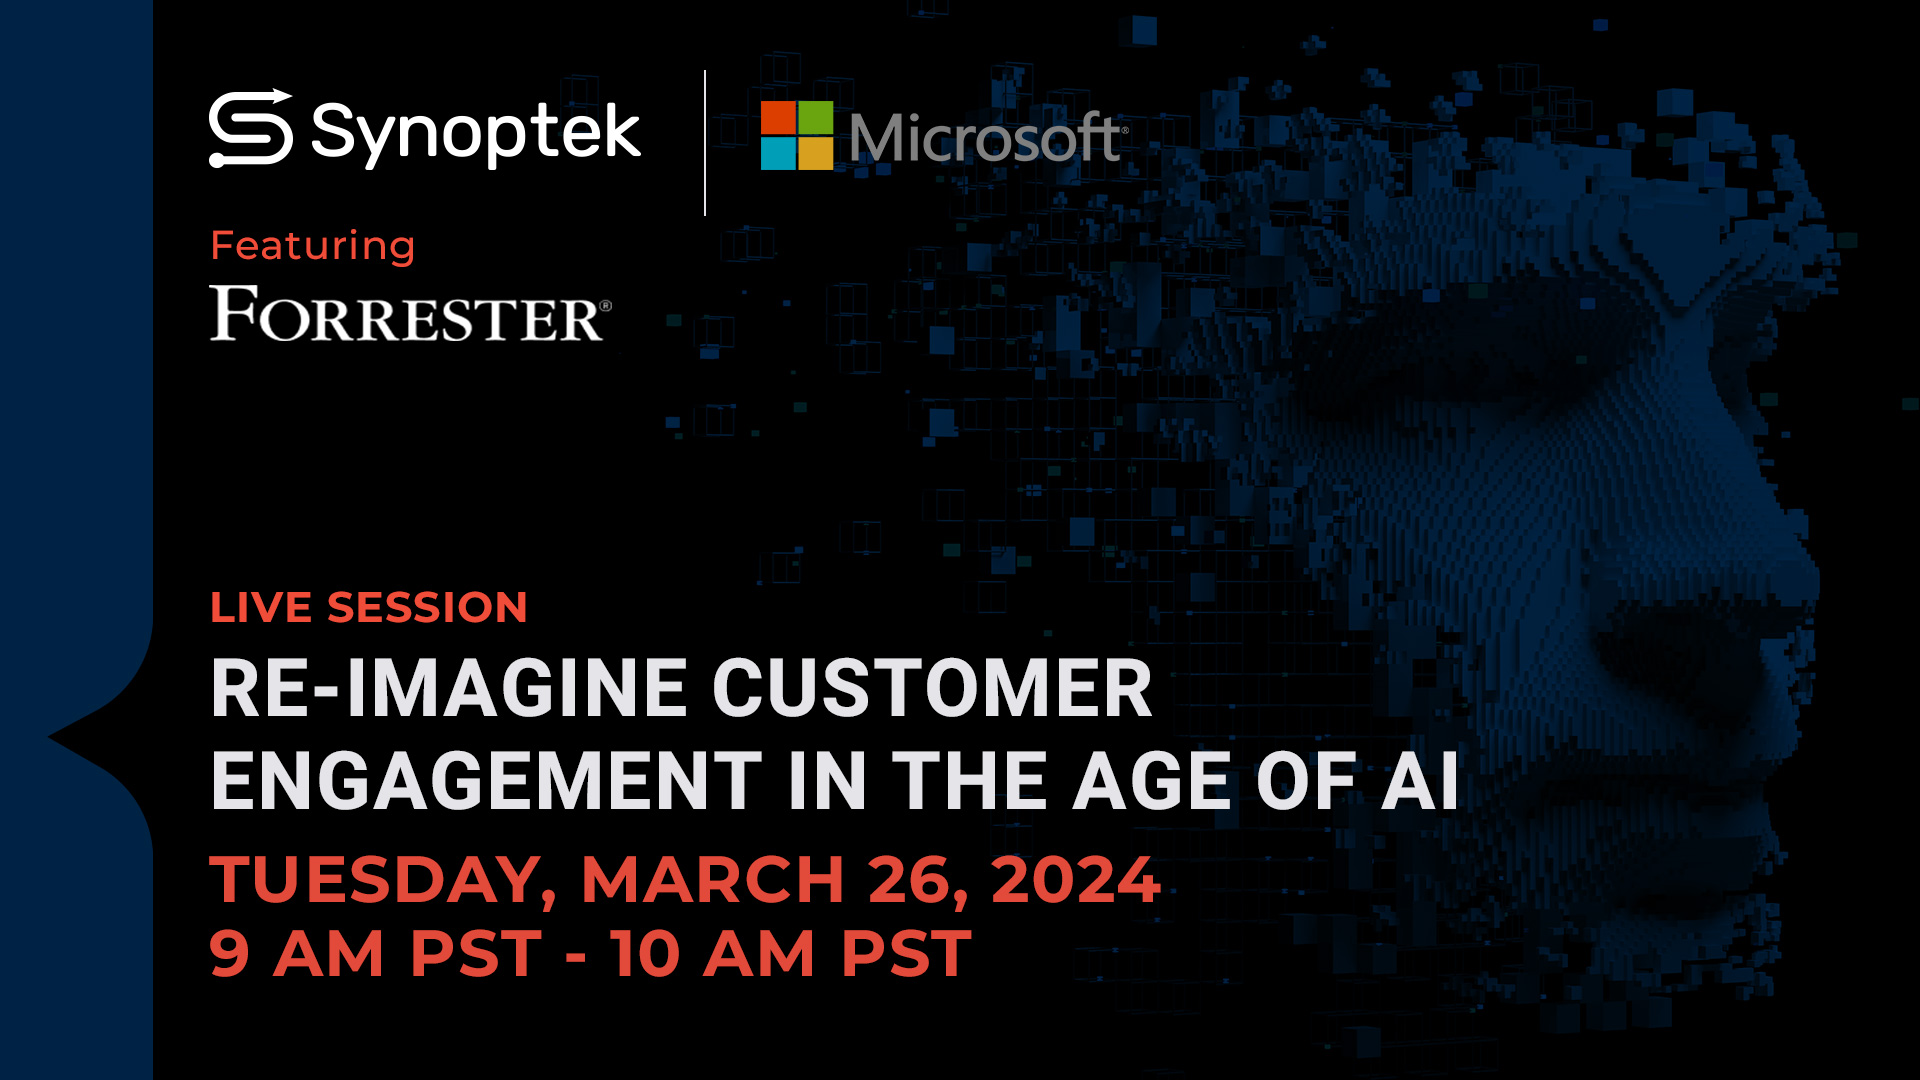 Re-imagine Customer Engagement in the Age of AI, Online Event